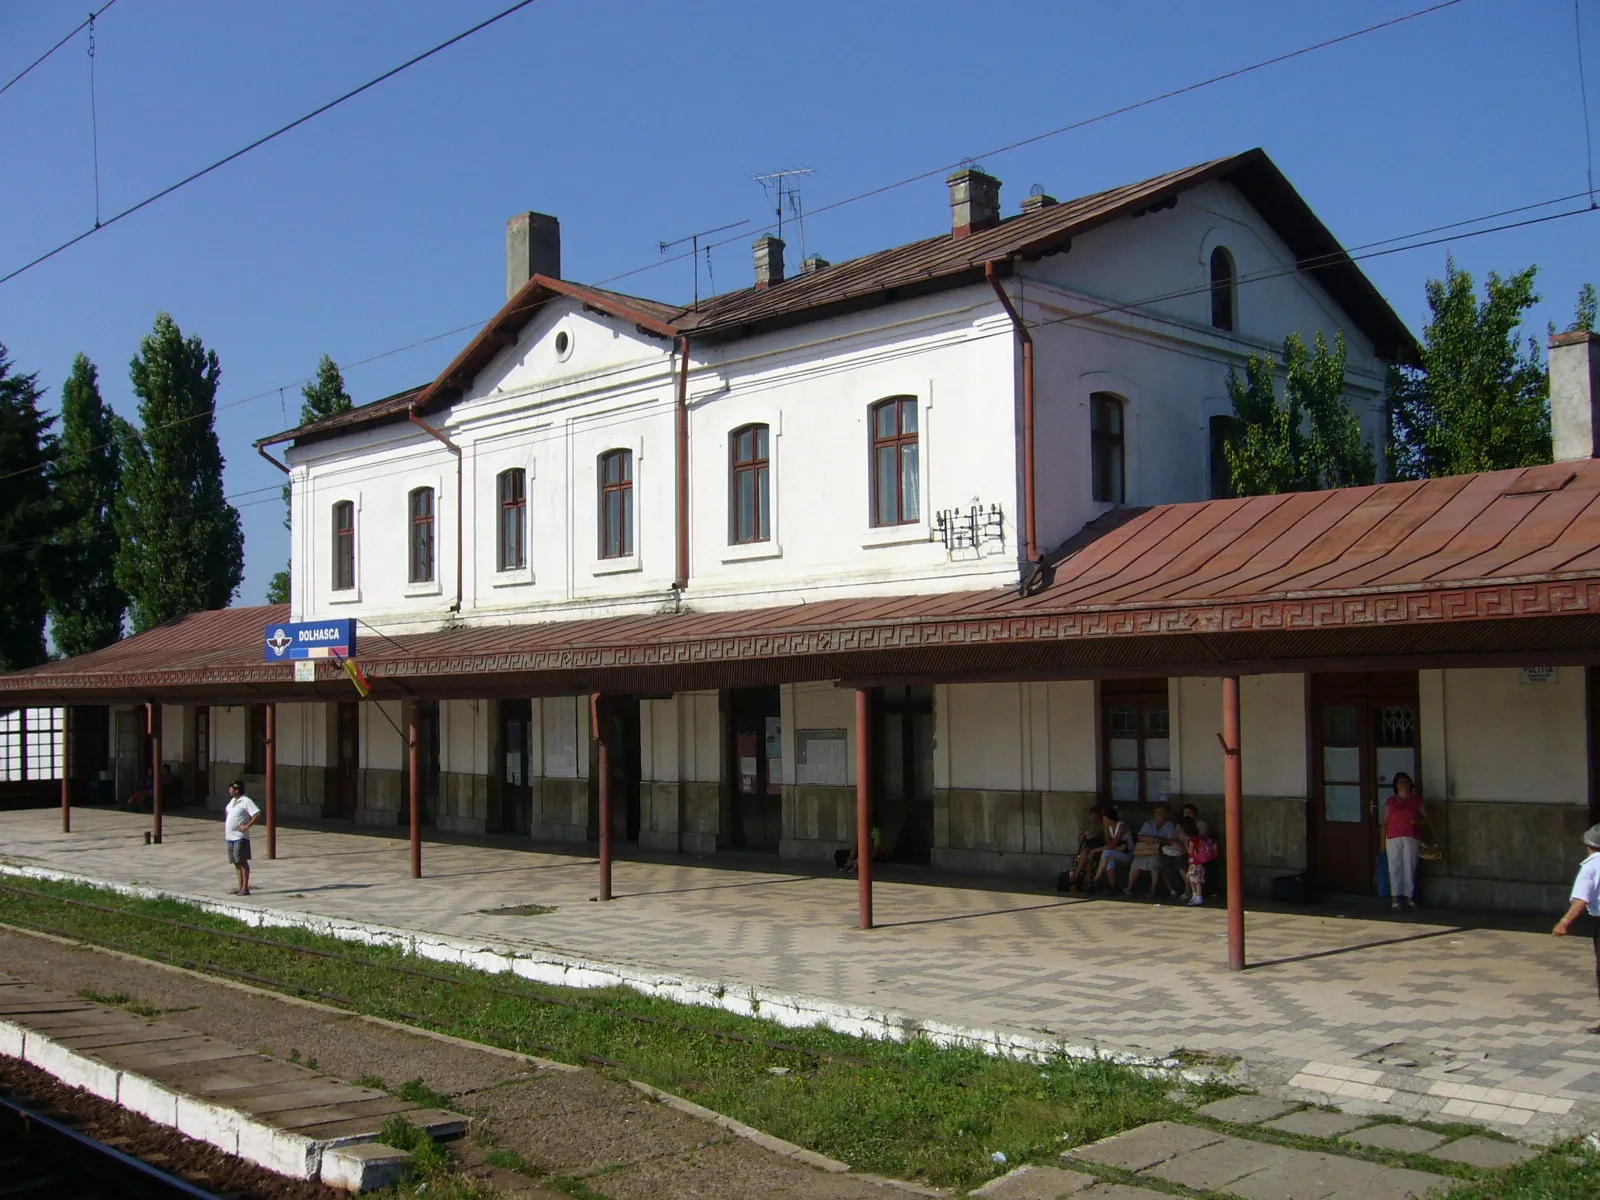 Photo showing: The railway station of Dolhasca, Romania